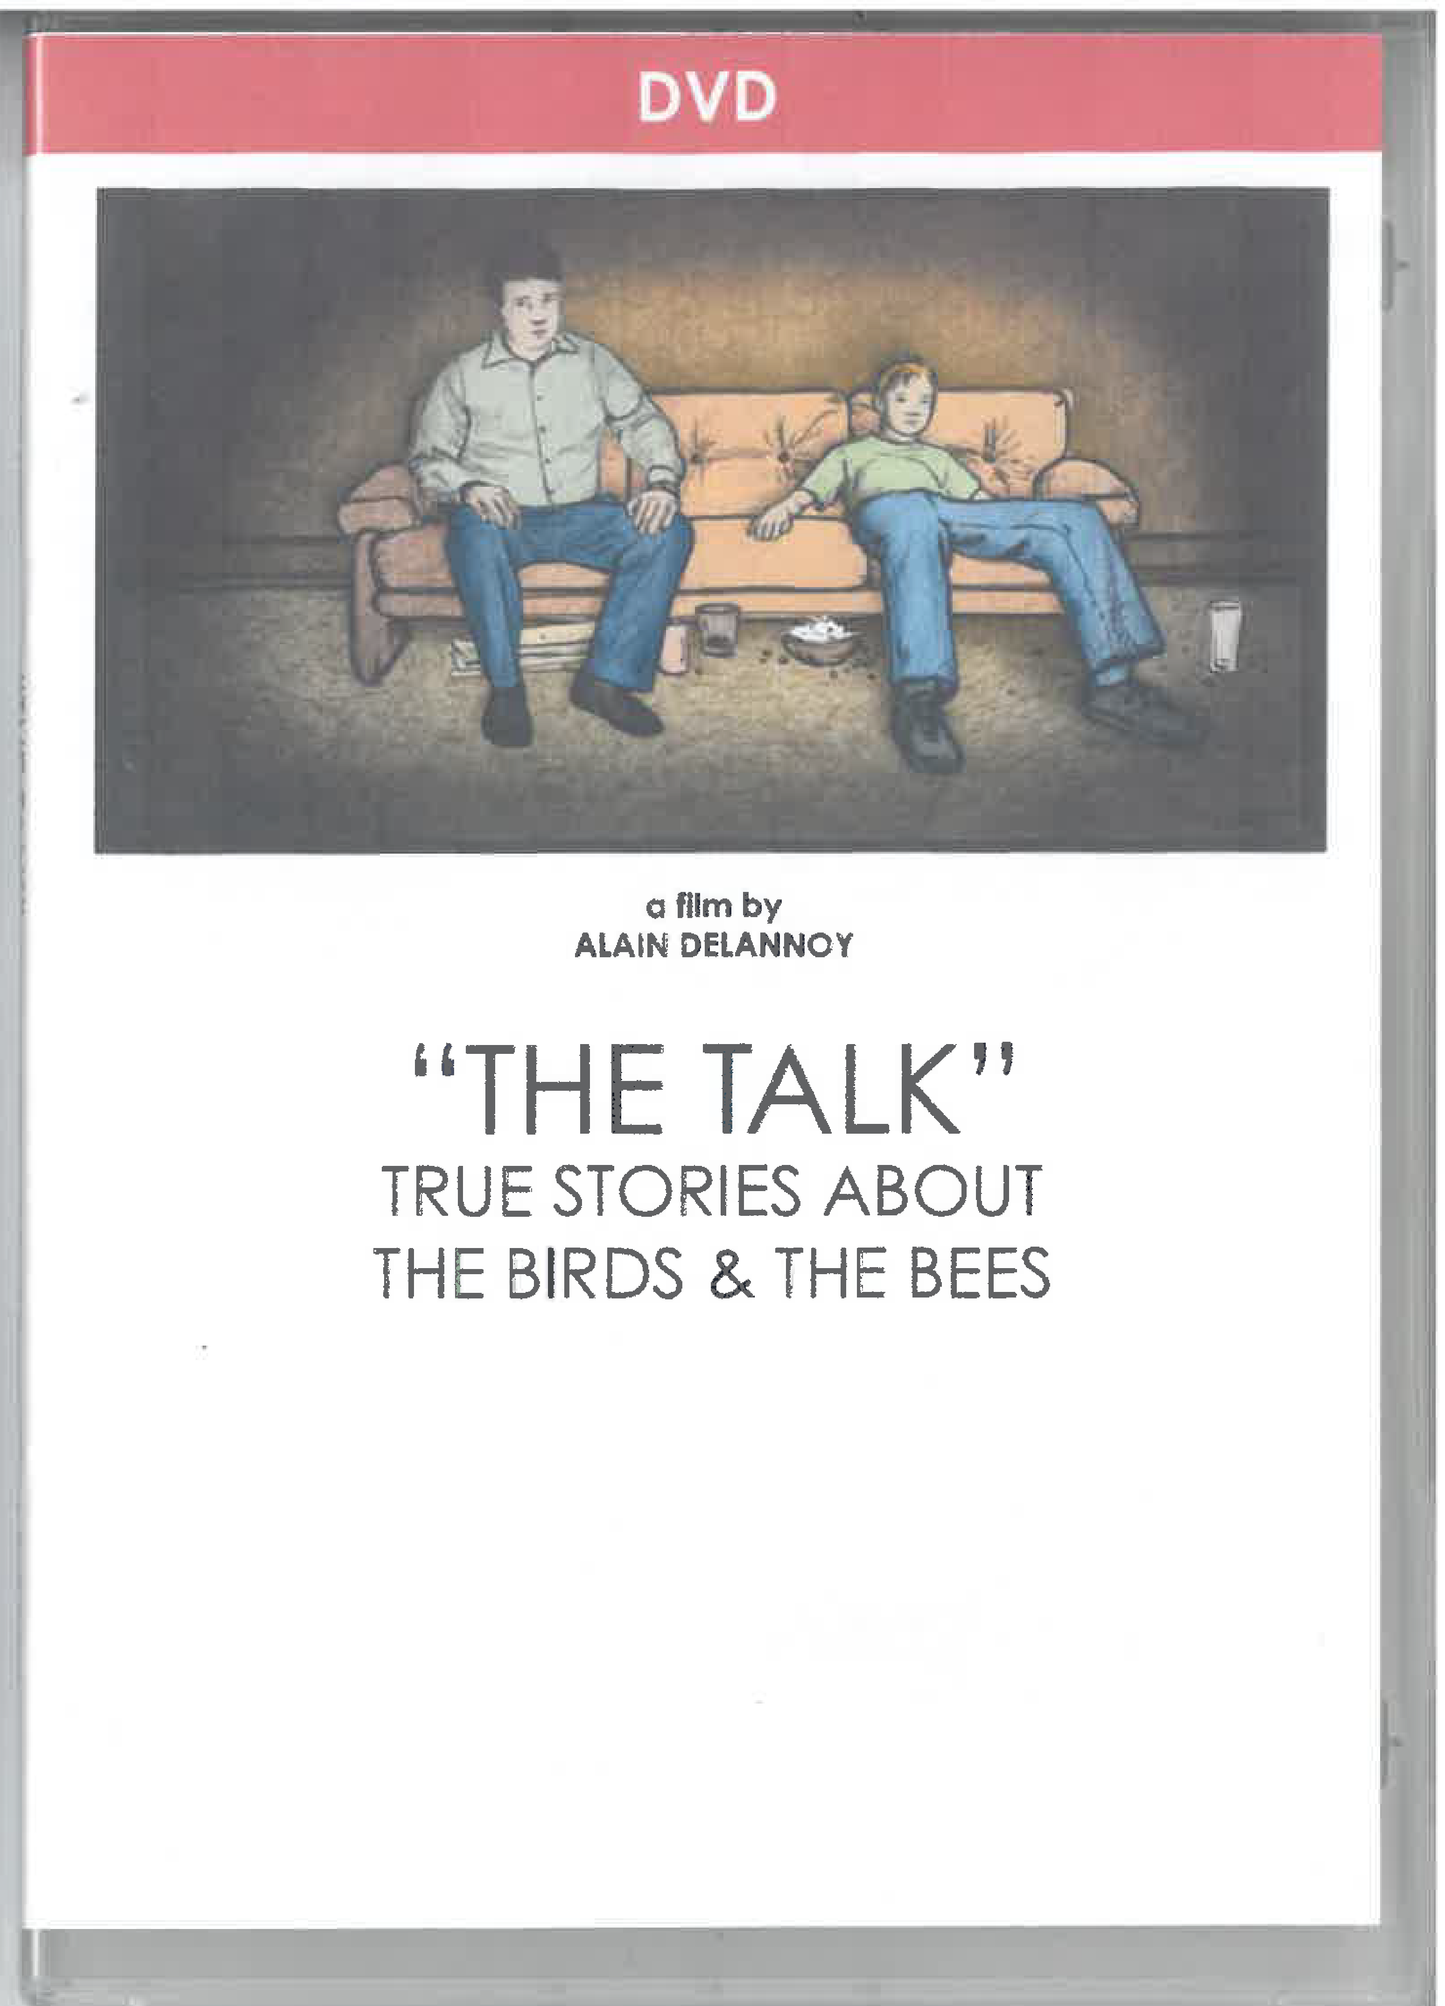 The Talk - True Stories About the Birds & the Bees